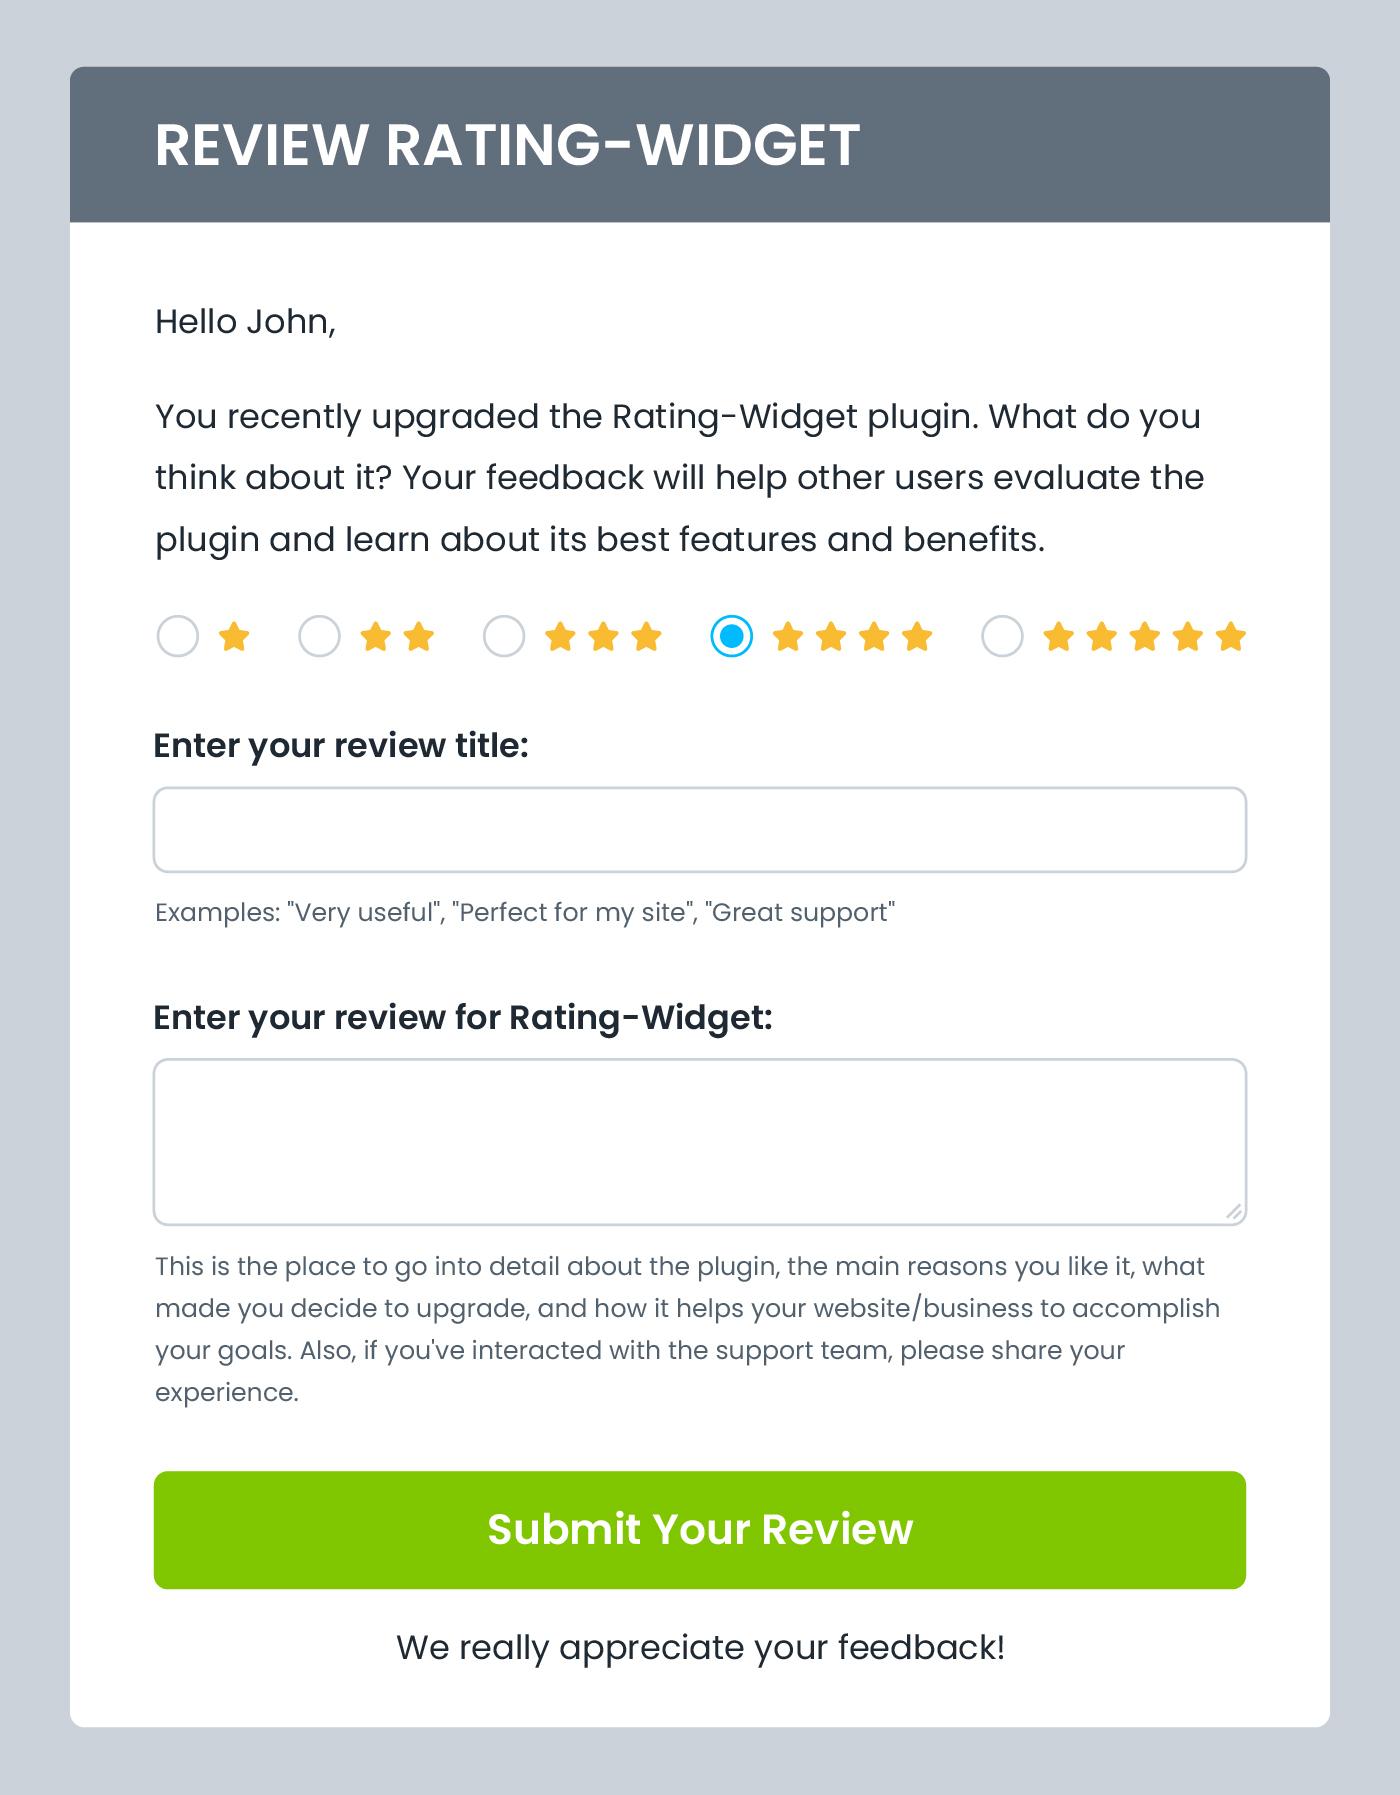 Freemius embedded review form in email for product review generation